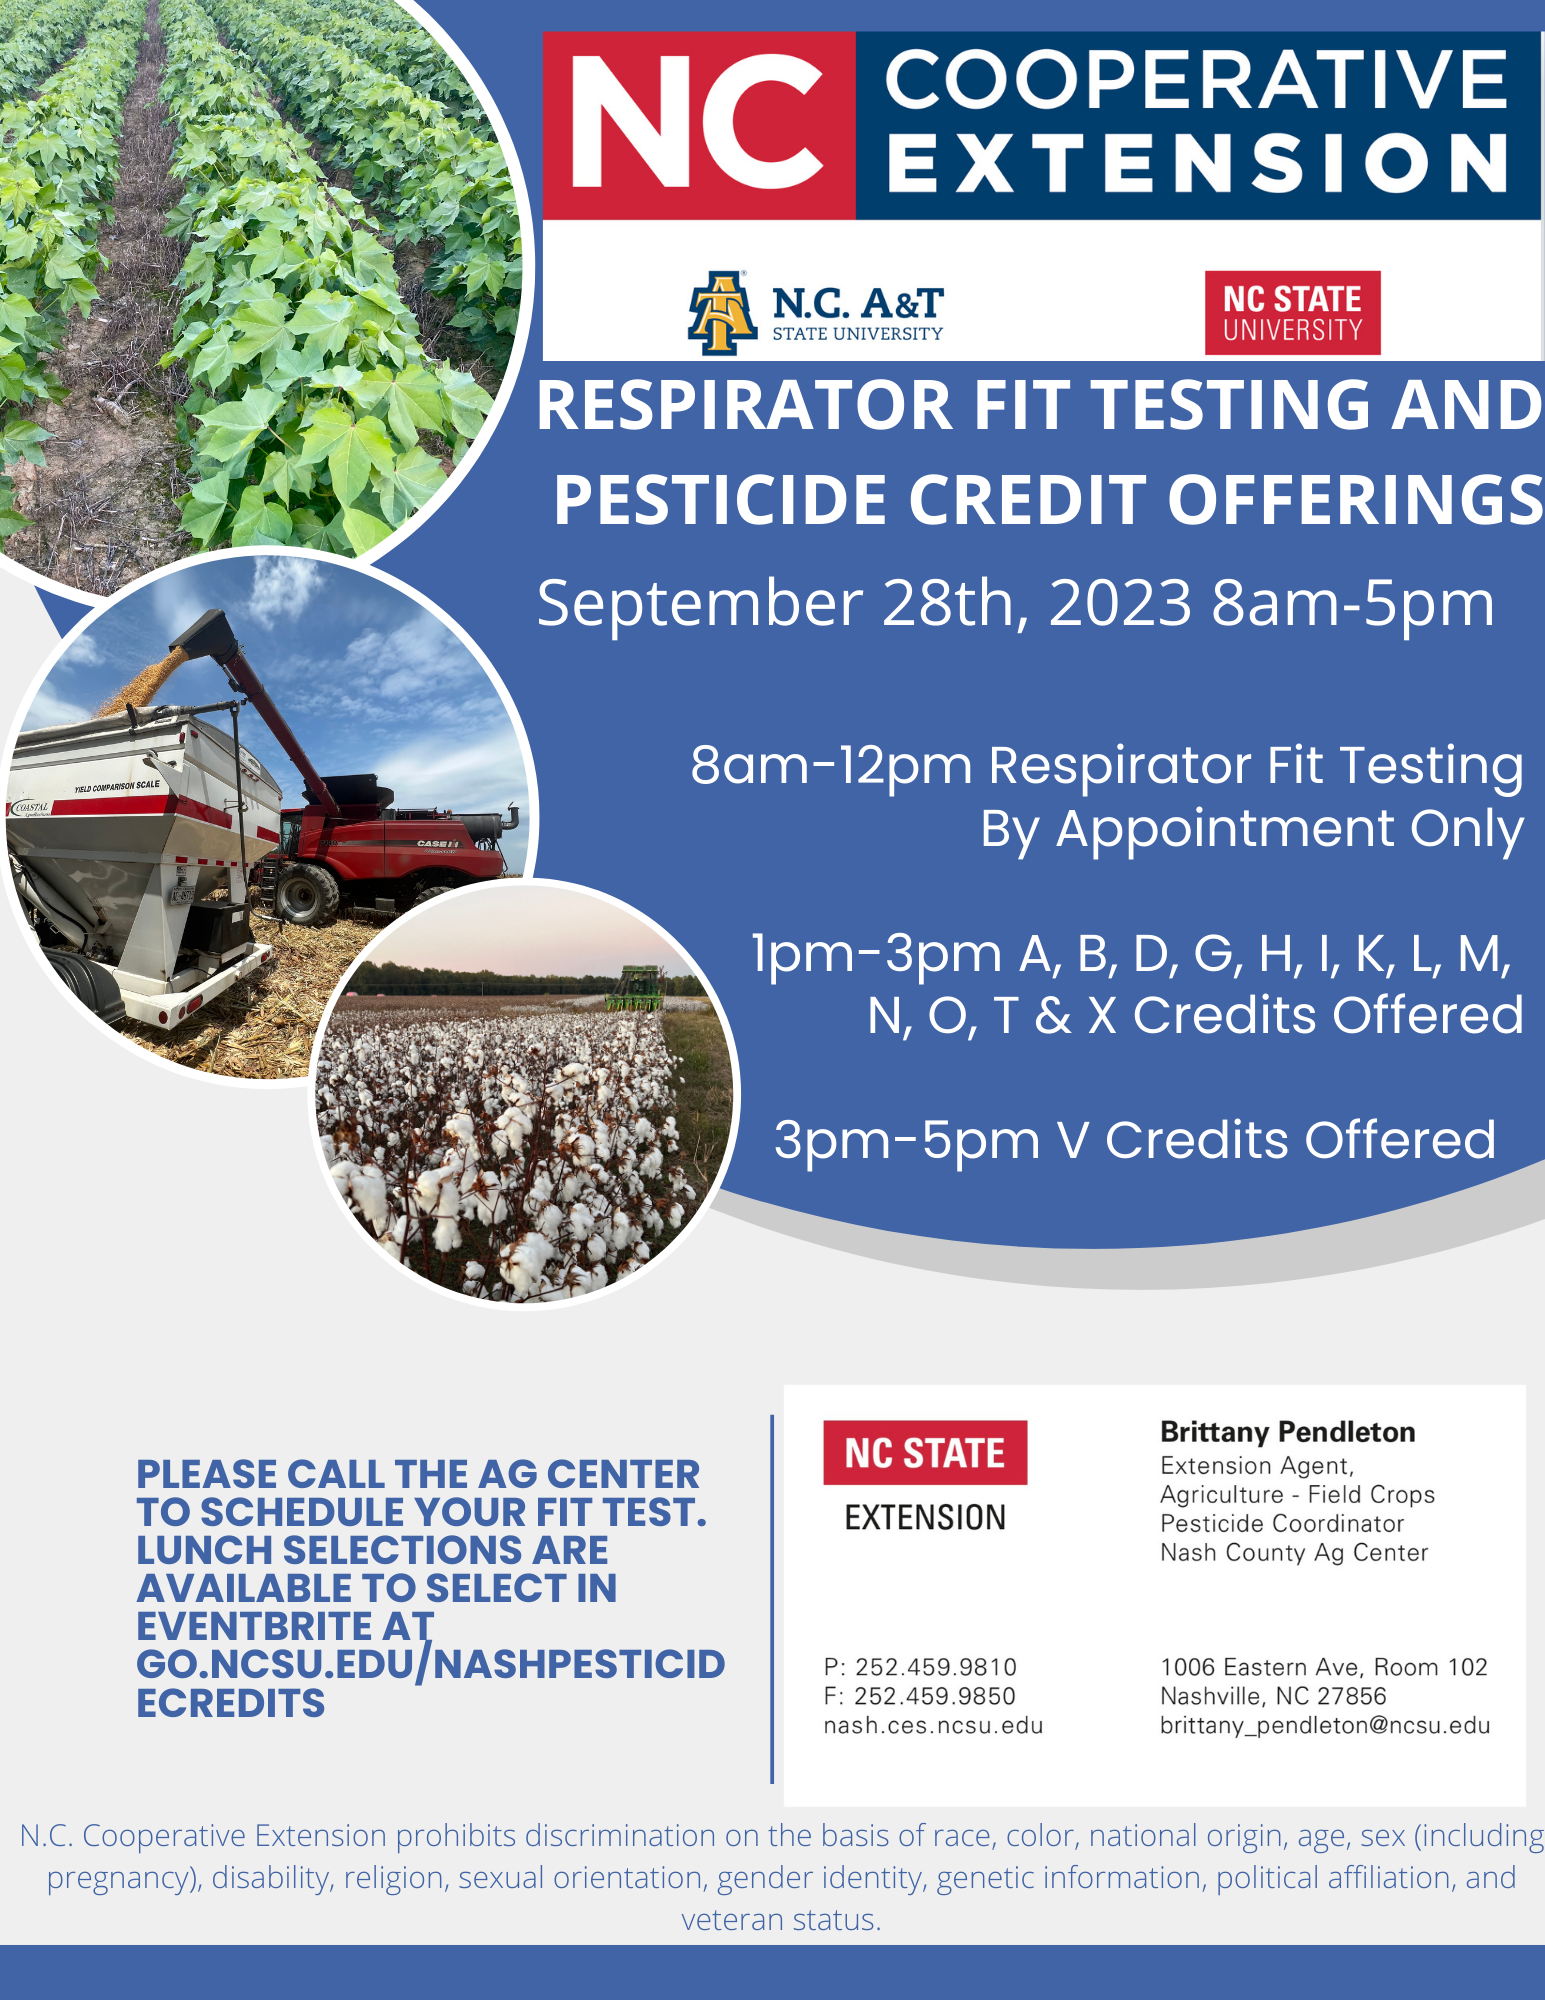 Respirator Fit Testing and Pesticide Credit Offerings event